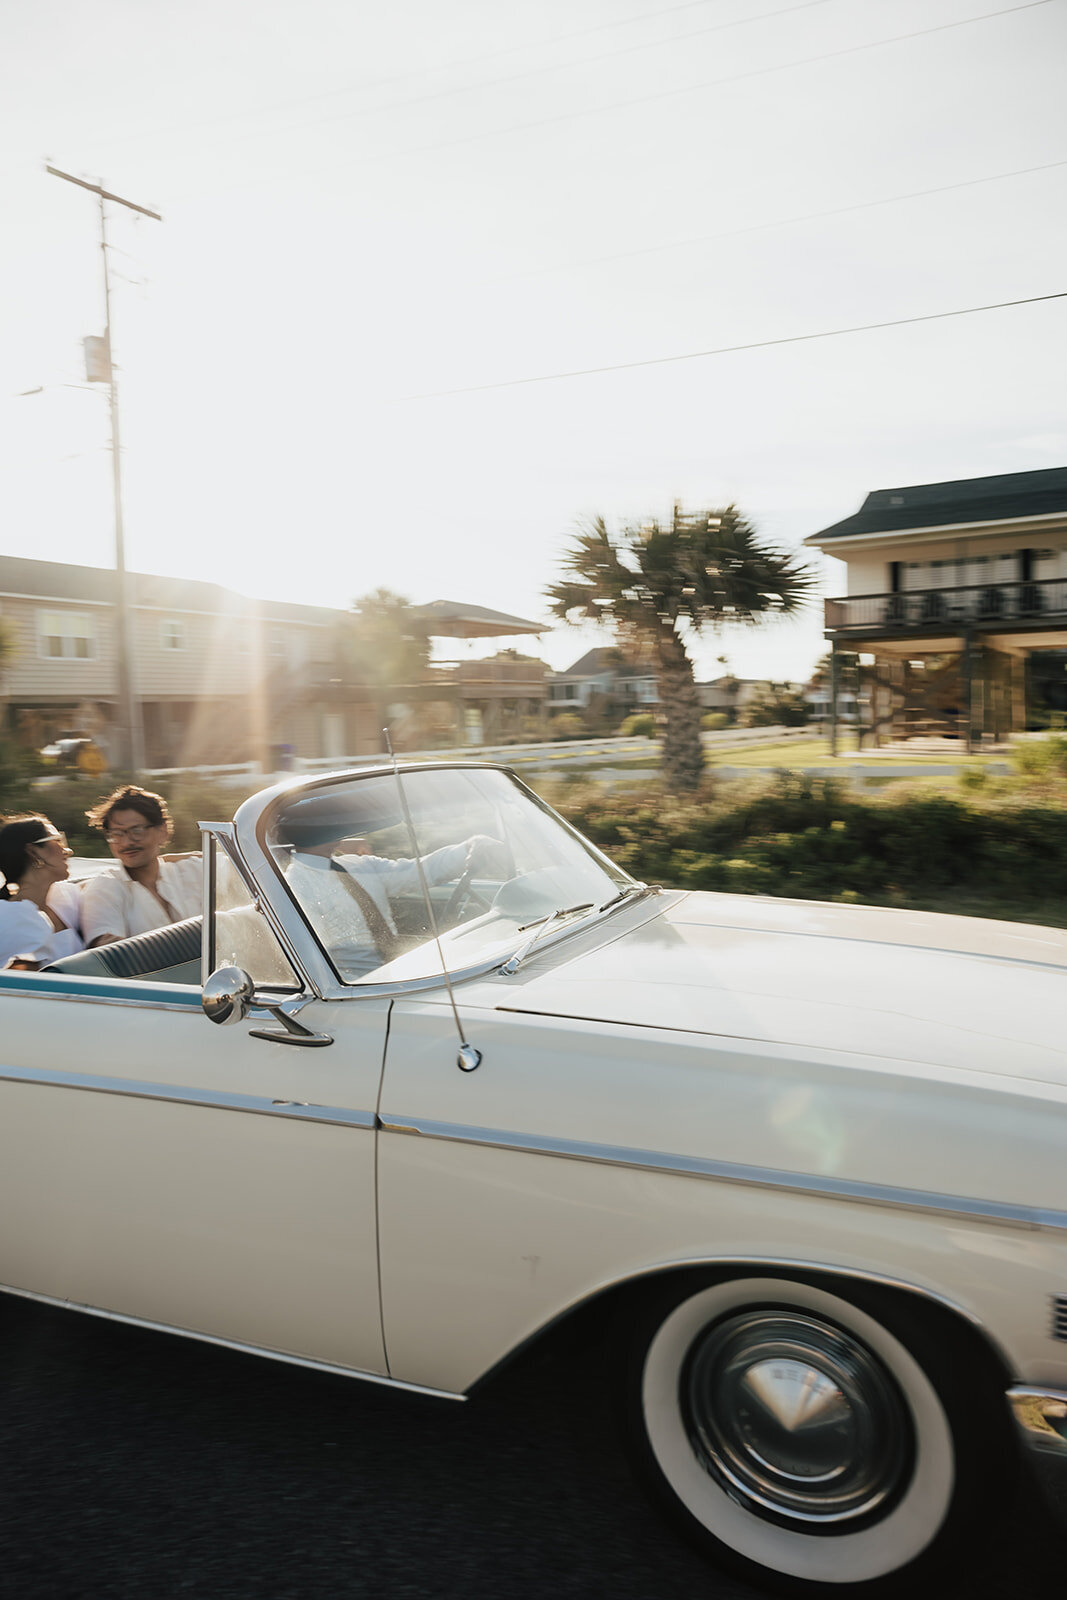 1962 MERCURY MONTEREY with cheuffeur driving on Folly BEach road with couple sitting in back. Palm tree and beach house in the background